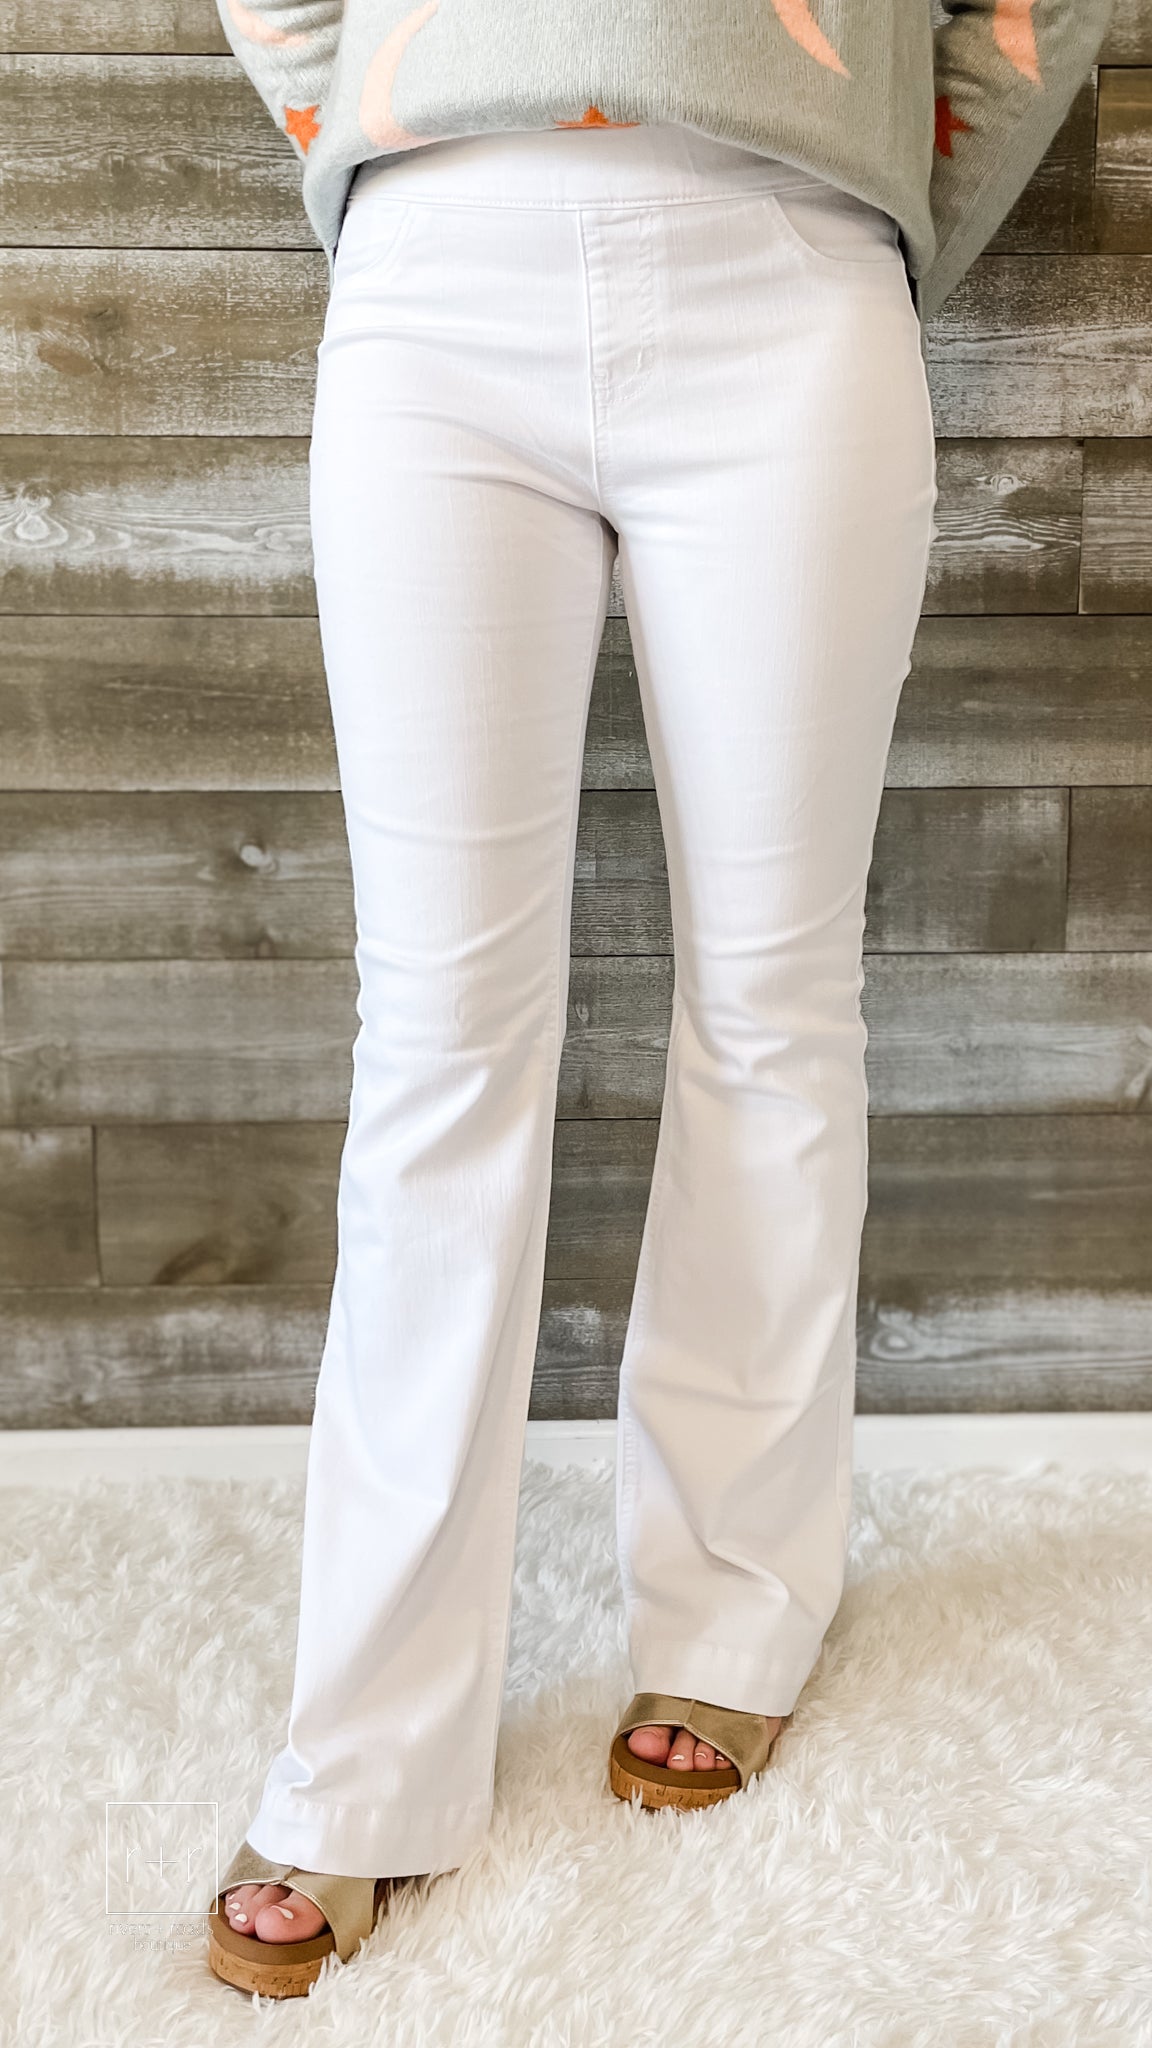 cello jeans C35324WHT white wash pull on flared jegging